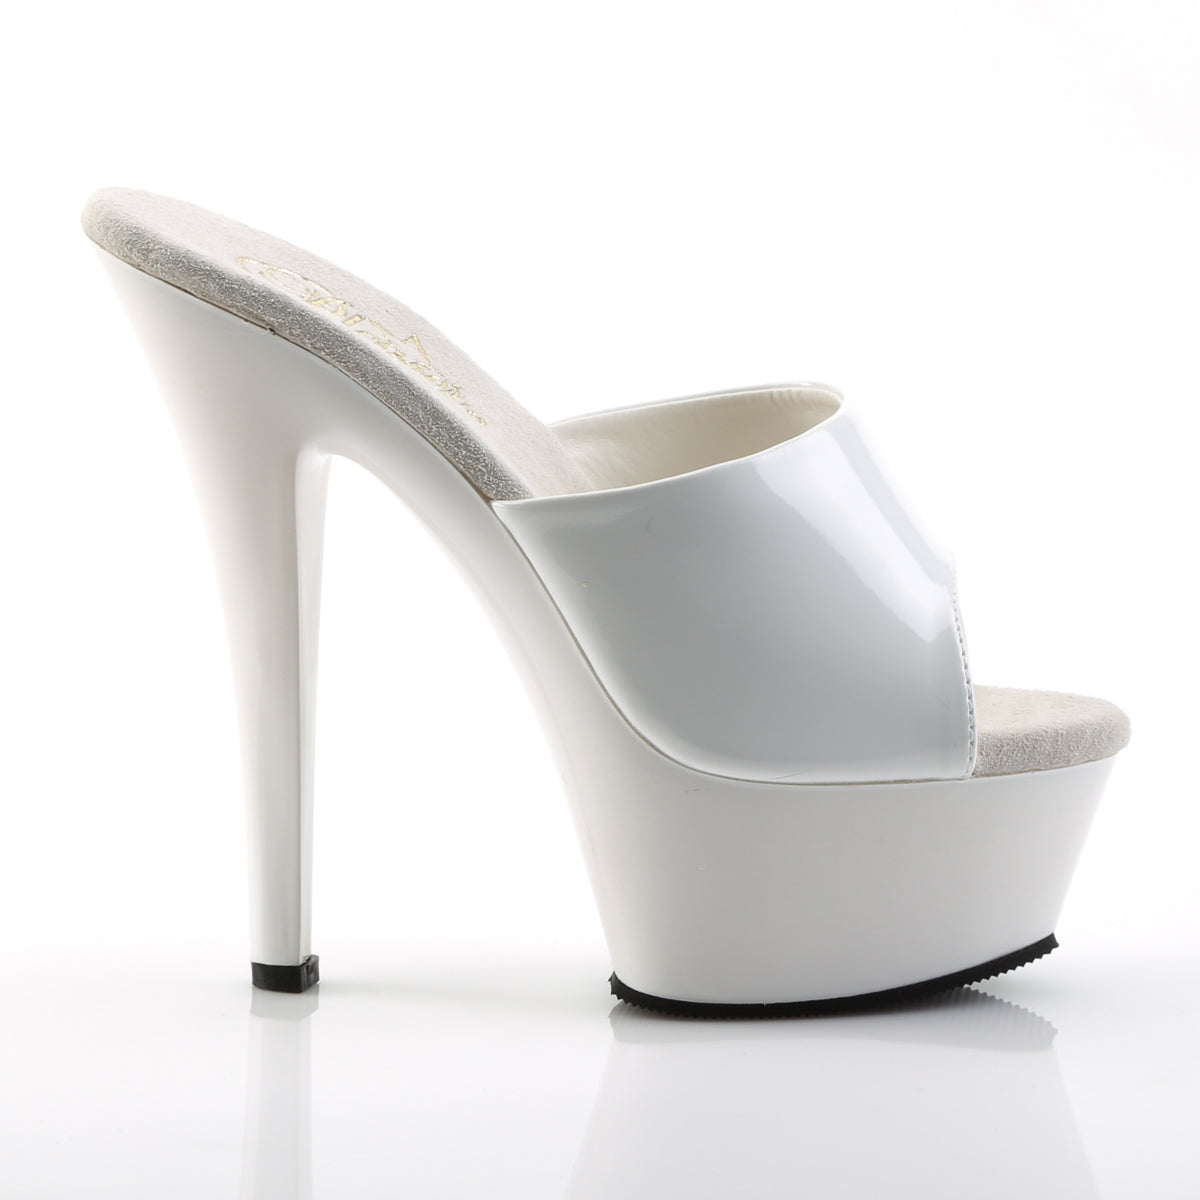 KISS-201 Pleaser 6" Heel White Patent Pole Dancing Platforms-Pleaser- Sexy Shoes Fetish Heels